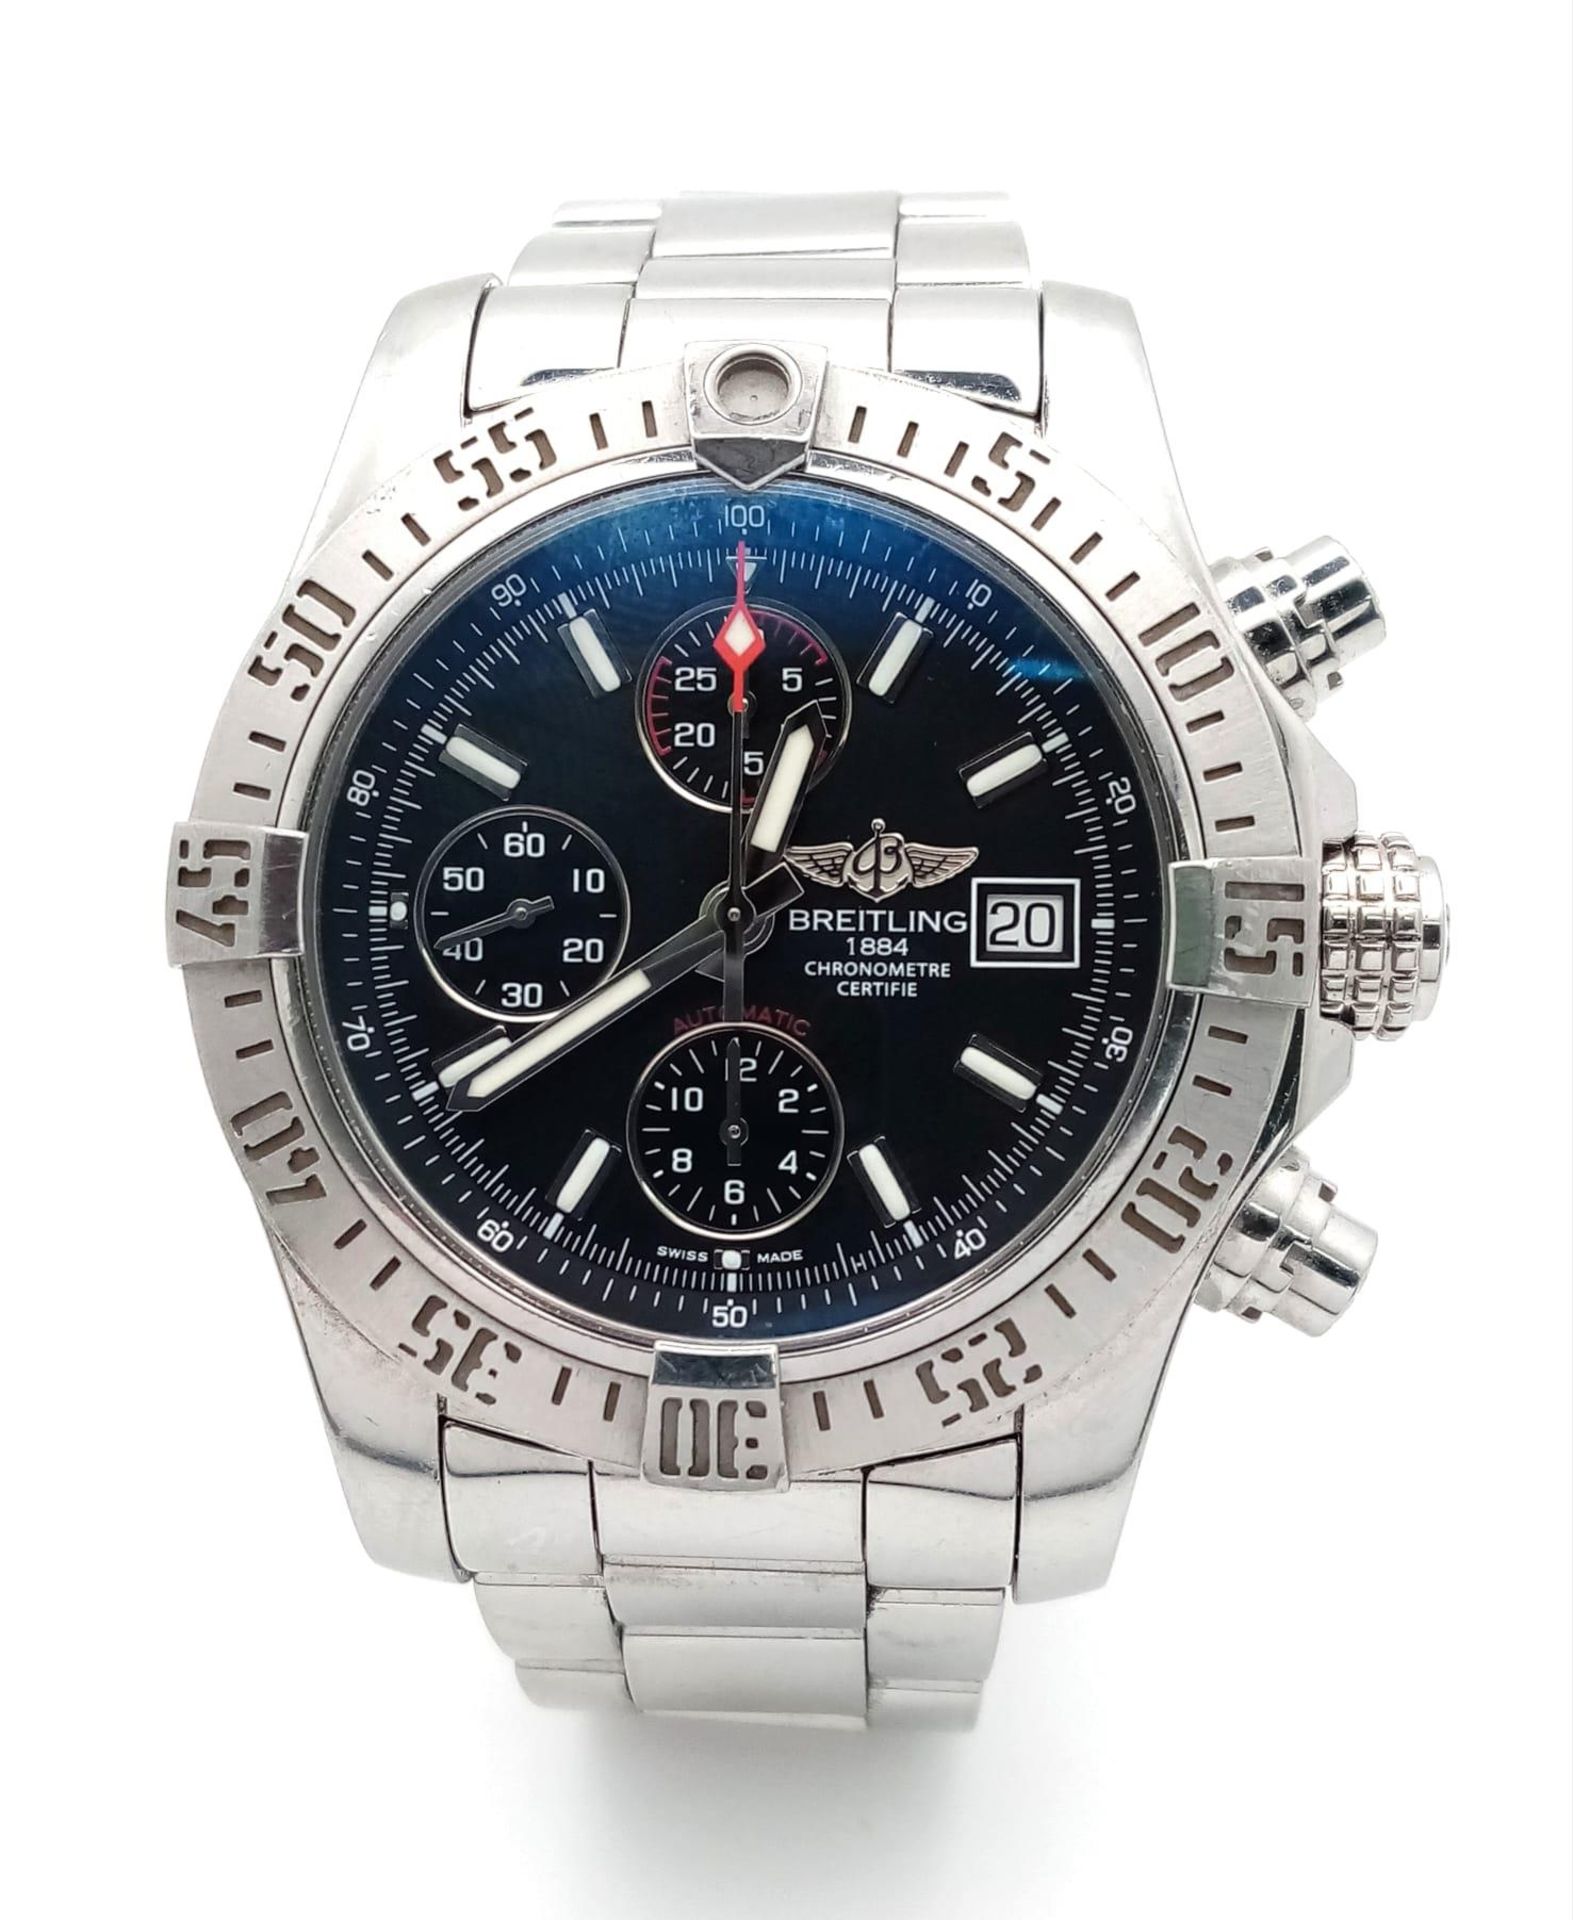 A Breitling Avenger II Chronograph Gents Watch. Stainless steel bracelet and case - 43mm. Black dial - Bild 2 aus 11